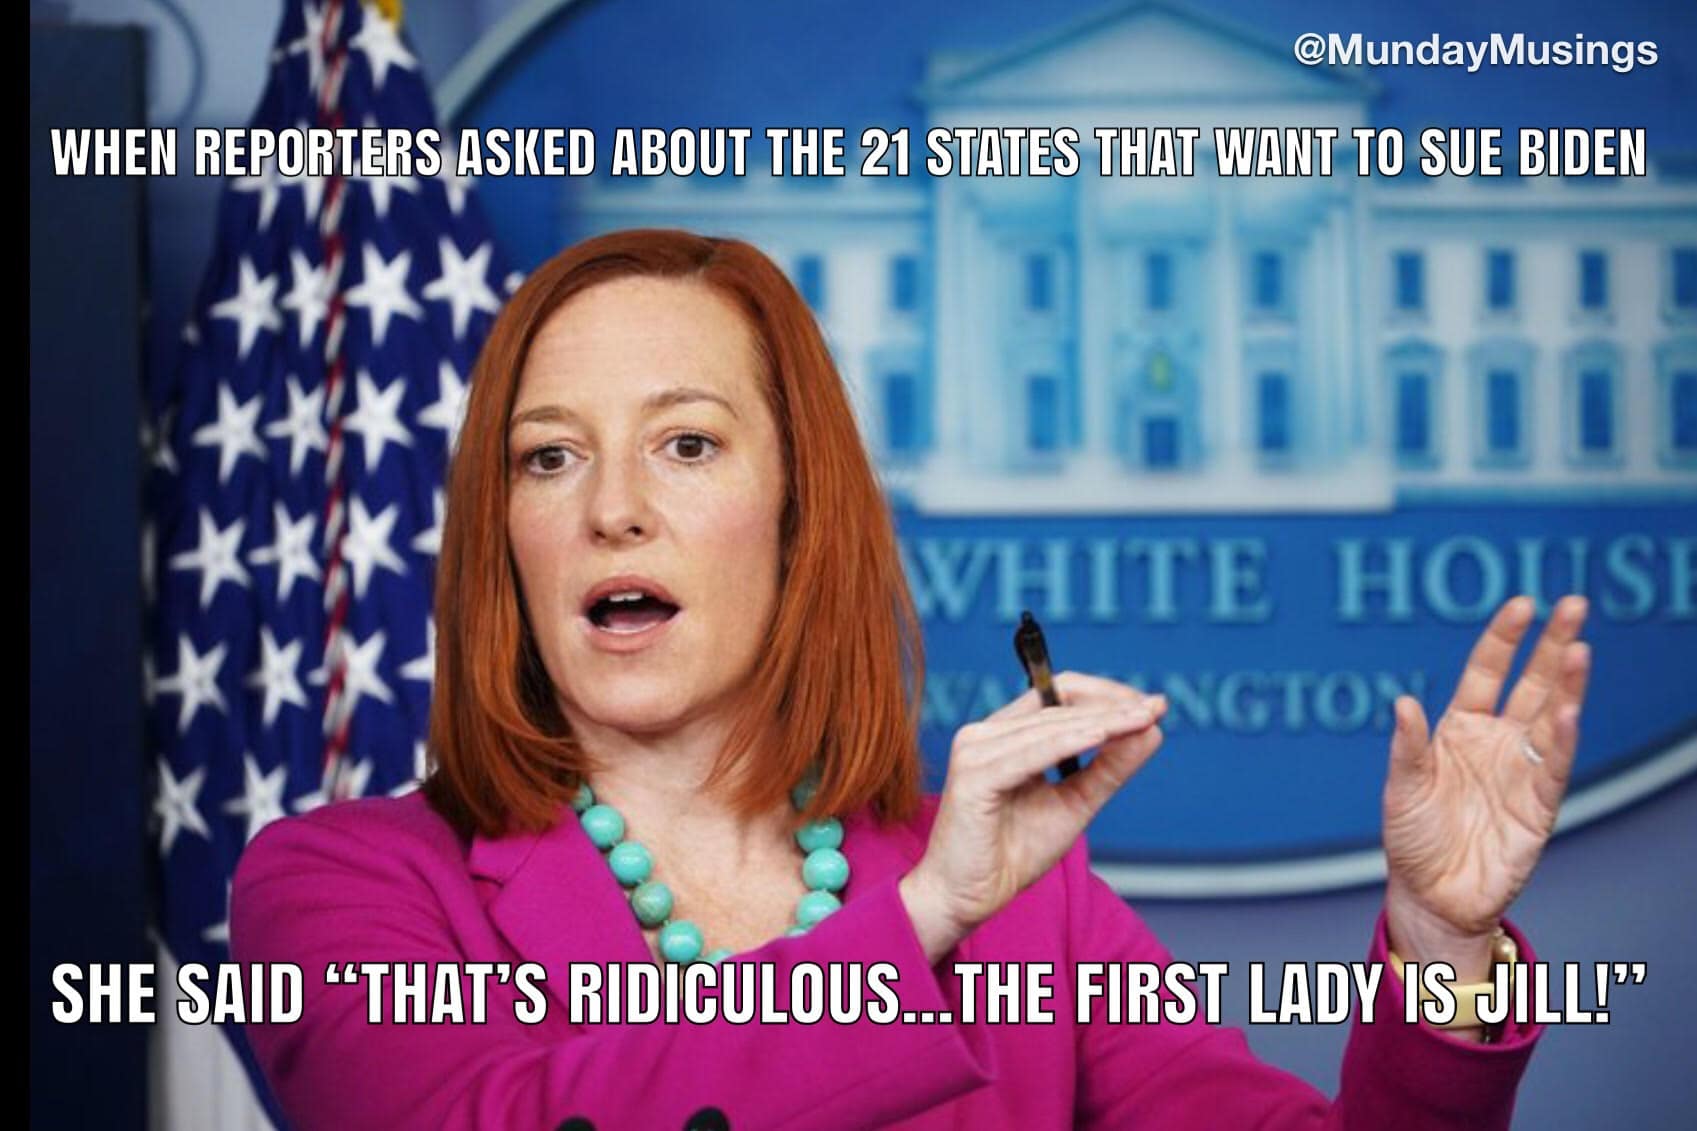 Crusade Channel Meme Of The Day – Psaki Sets the Press Corp Straight on Who’s Who